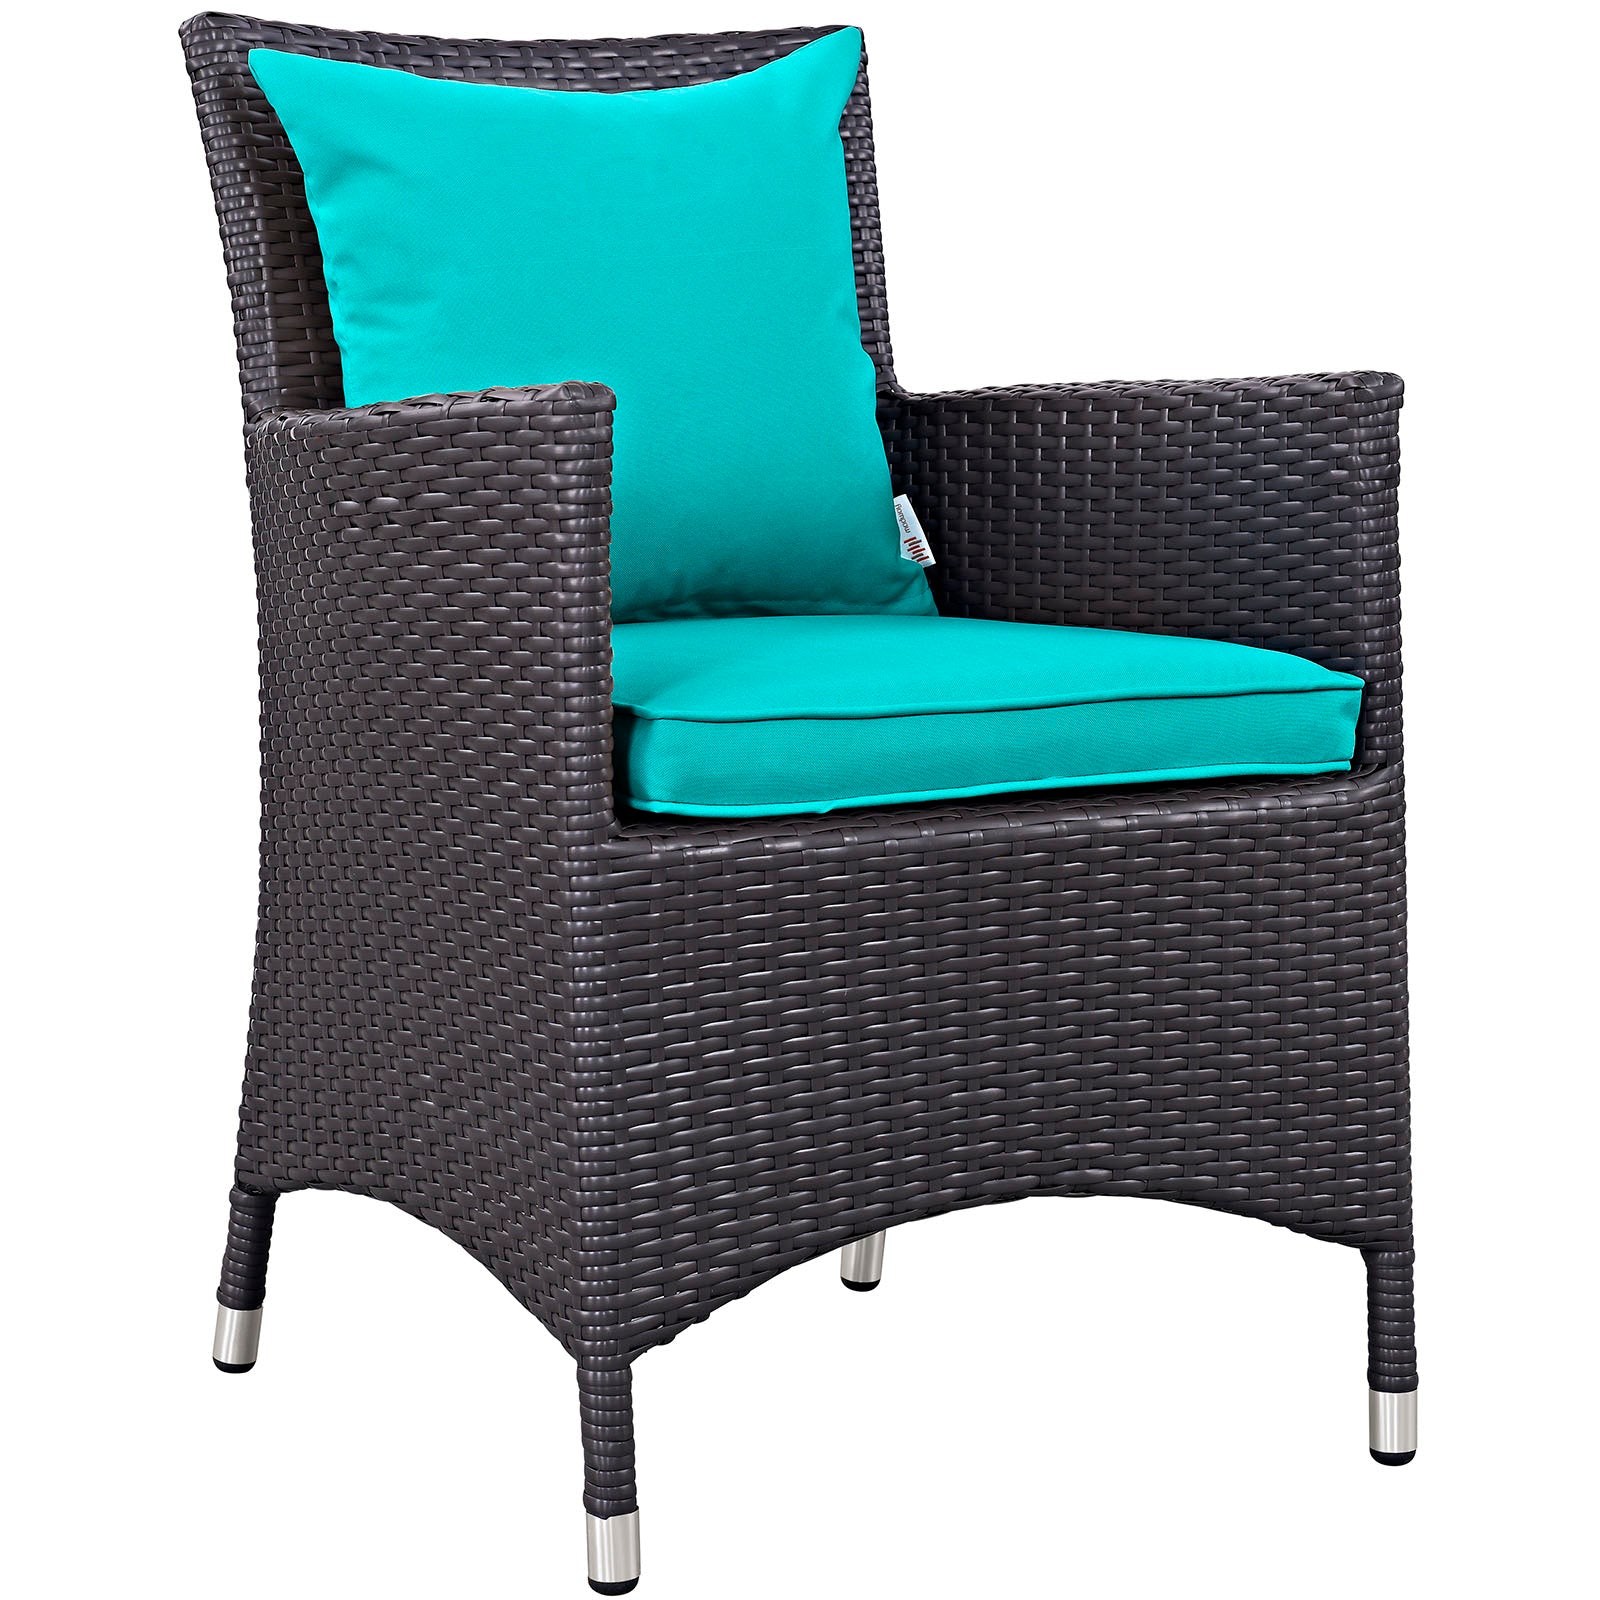 Modway Outdoor Dining Sets - Convene 9 Piece Outdoor Patio Dining Set Espresso Turquoise